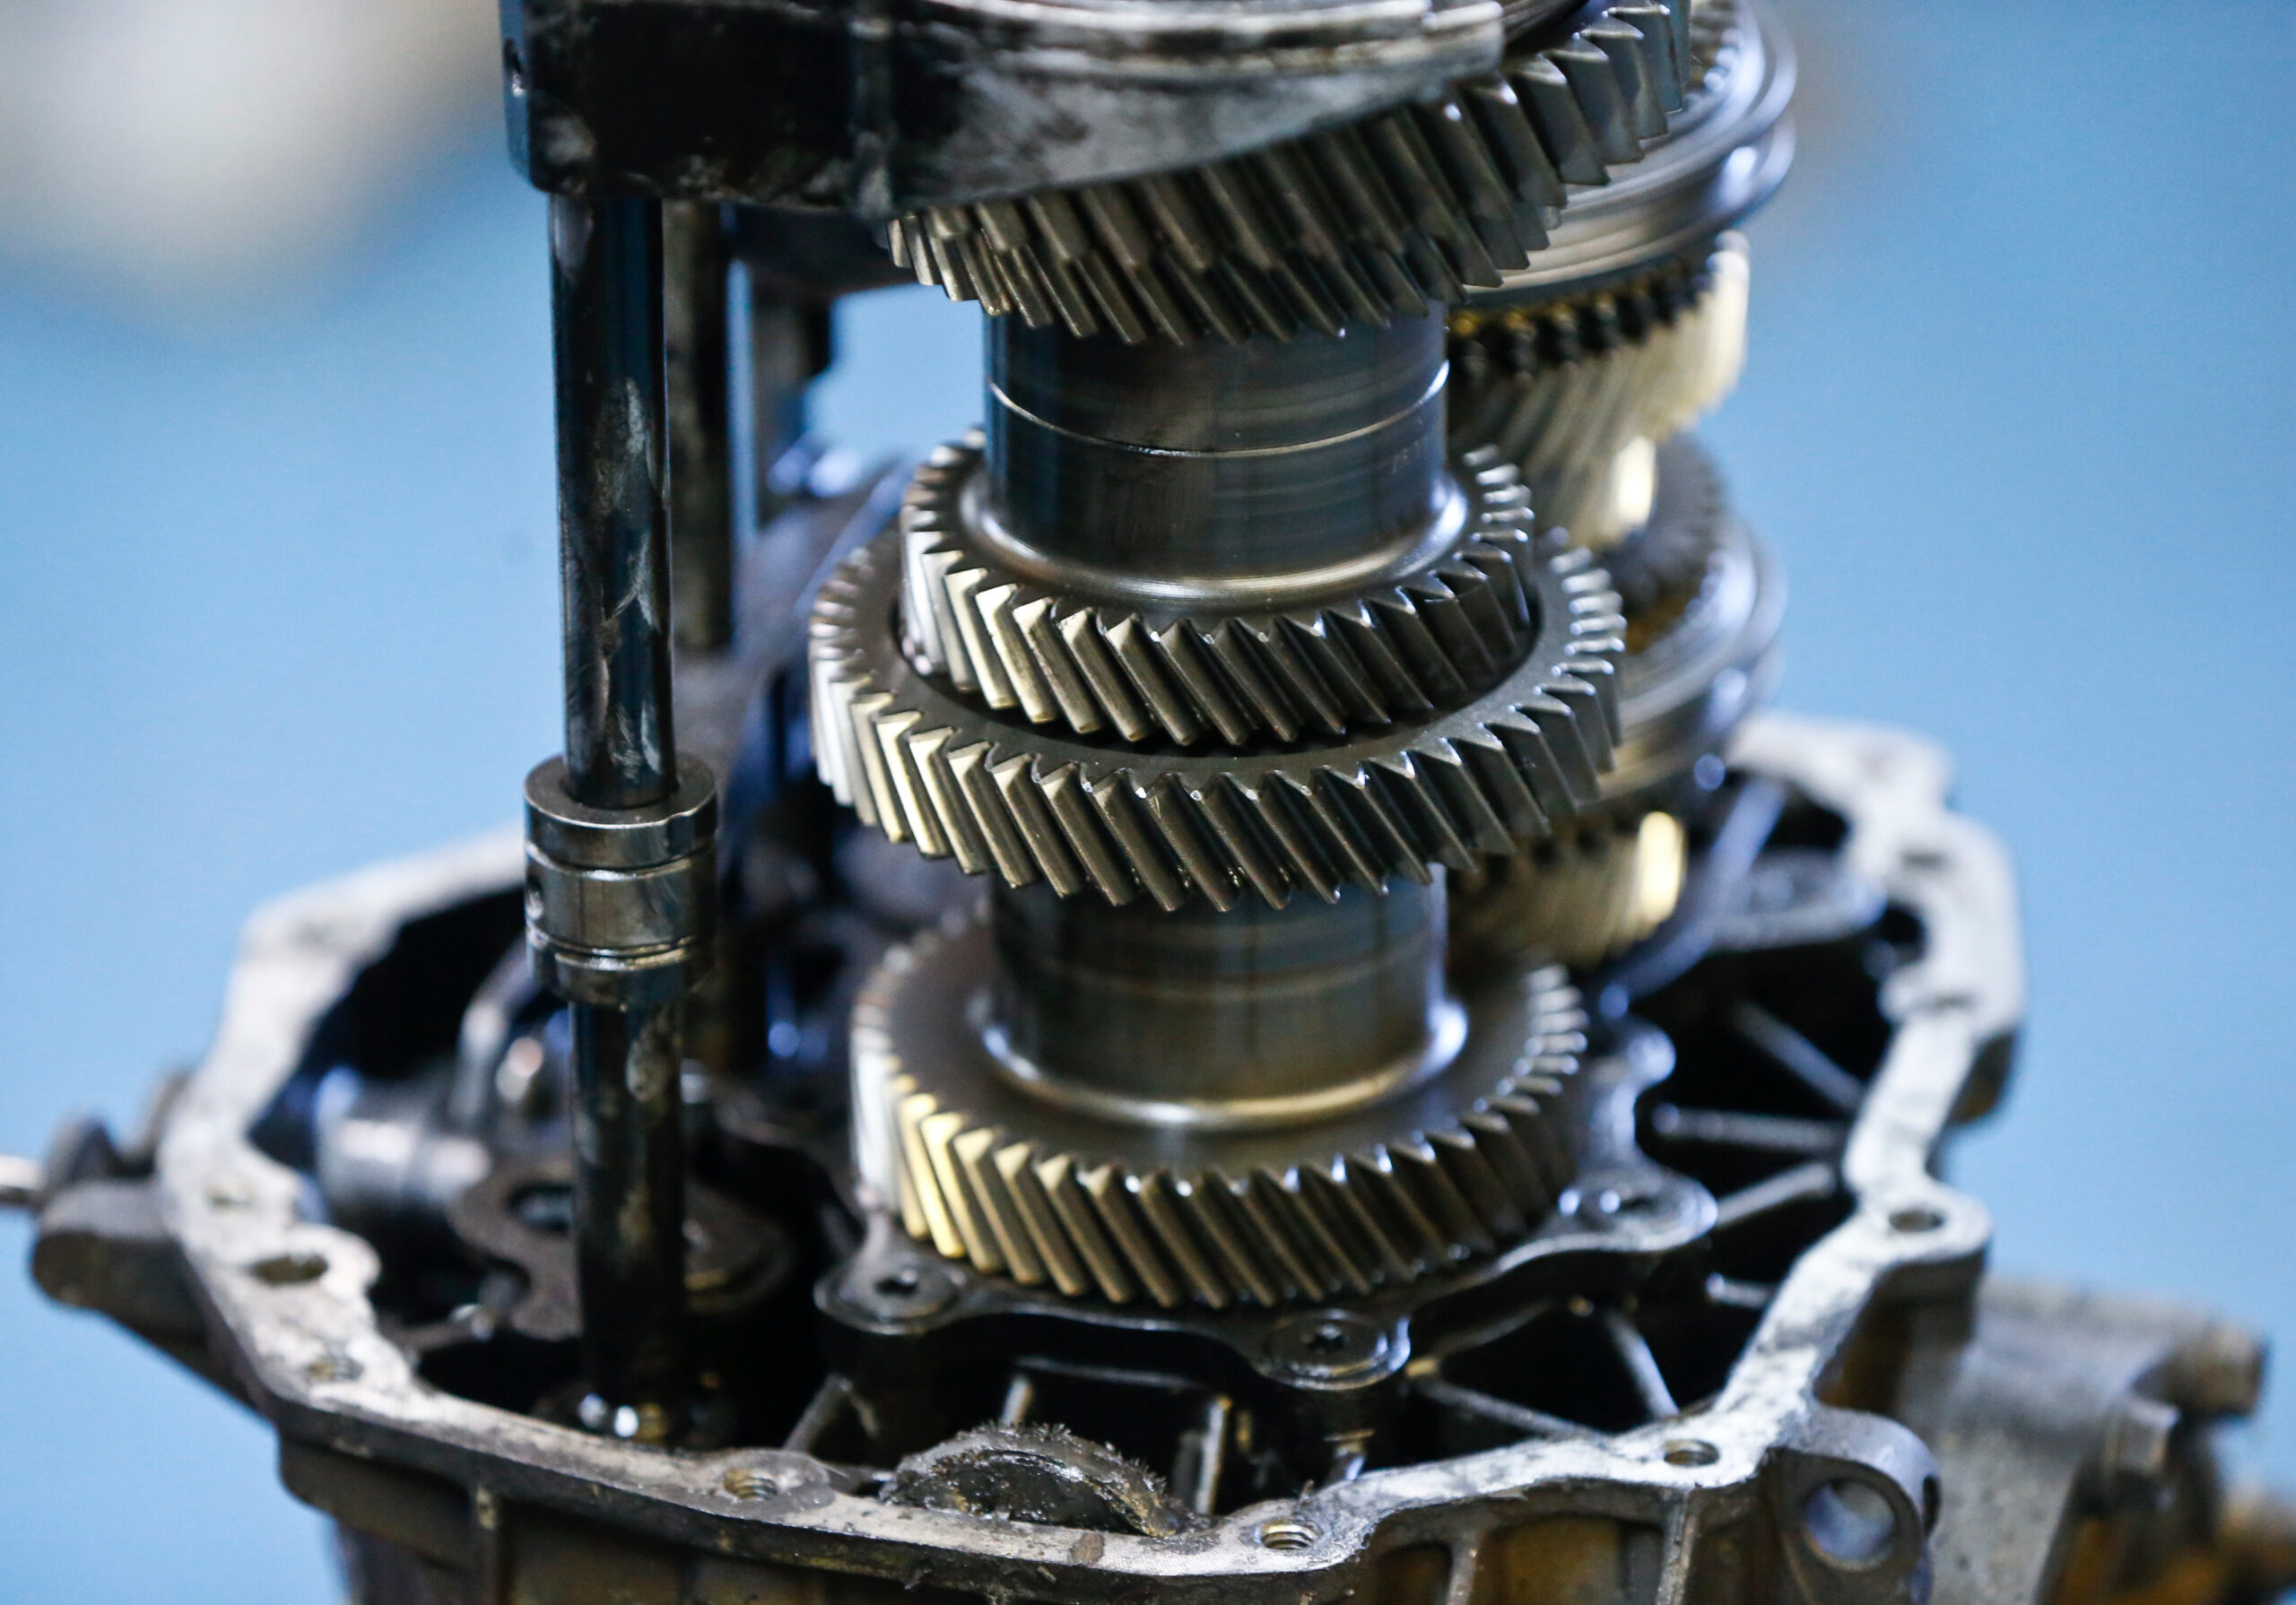 The exposed gears of a manual transmission are seen at a repair shop